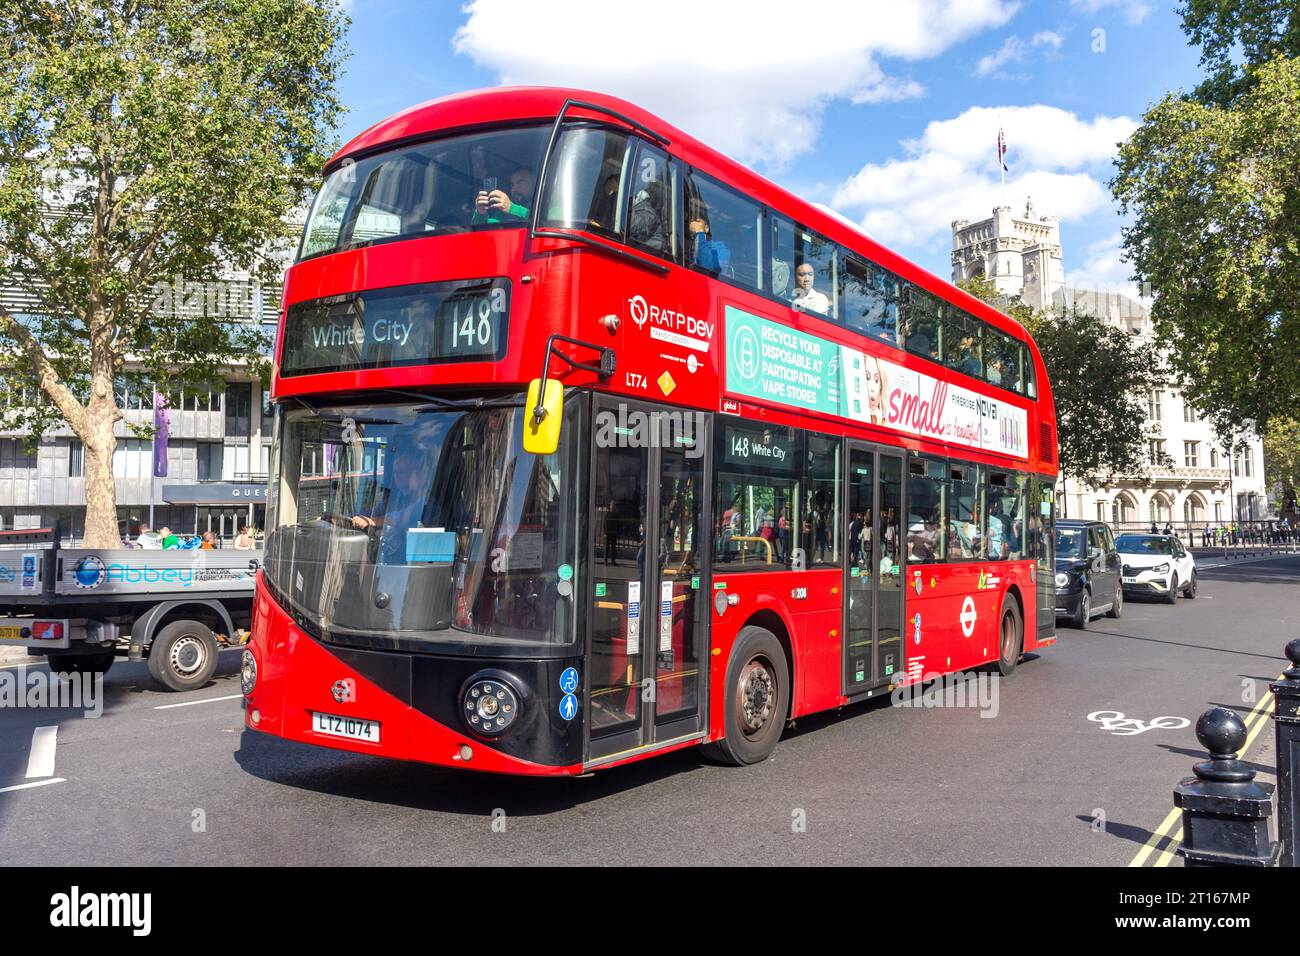 London double-decker bus, Broad Sanctuary, City of Westminster, Greater London, England, United Kingdom Stock Photo